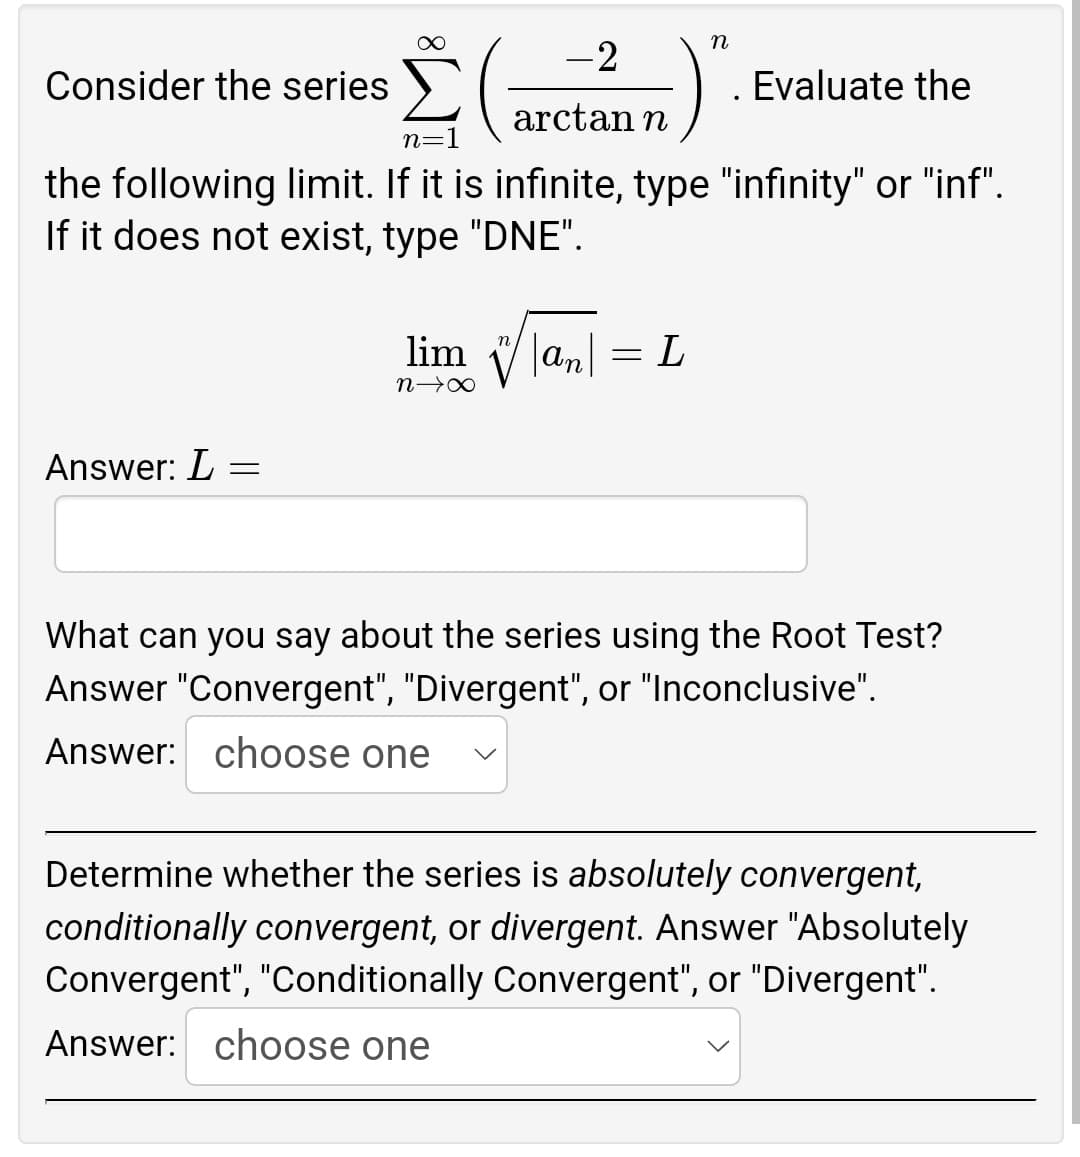 n
-2
Consider the series
Evaluate the
arctan n
n
the following limit. If it is infinite, type "infinity" or "inf".
If it does not exist, type "DNE".
lim an
L
n→∞
Answer: L =
What can you say about the series using the Root Test?
Answer "Convergent", "Divergent", or "Inconclusive".
Answer: choose one
Determine whether the series is absolutely convergent,
conditionally convergent, or divergent. Answer "Absolutely
Convergent", "Conditionally Convergent", or "Divergent".
Answer: choose one
=